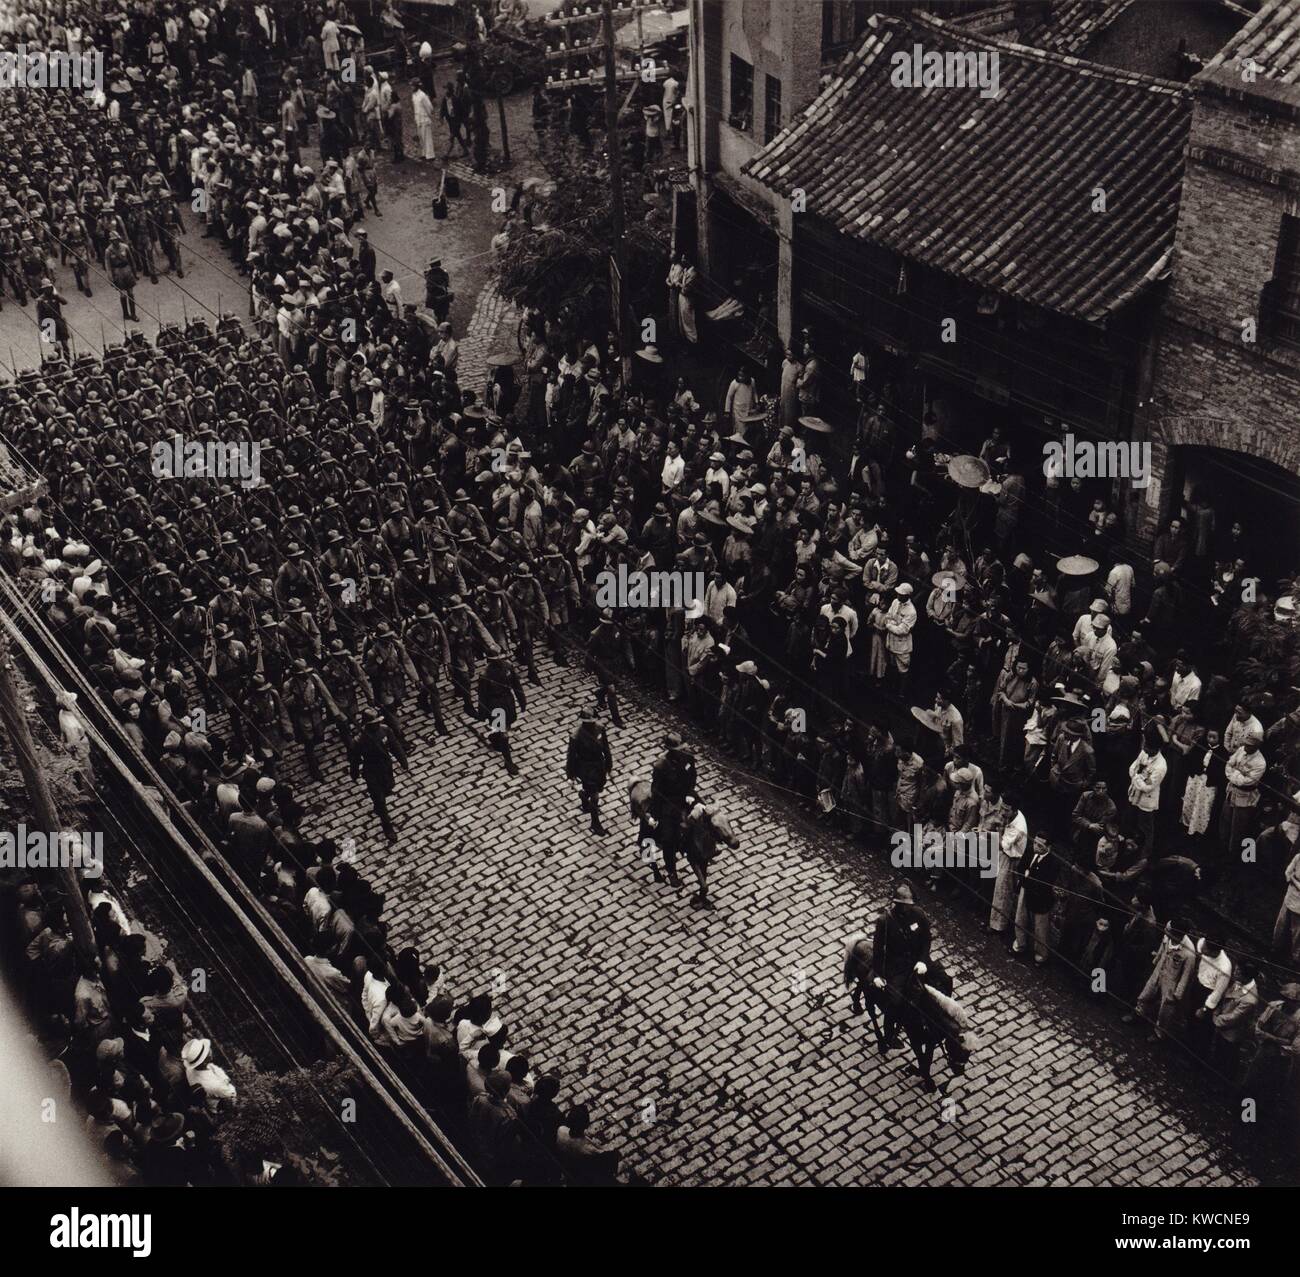 Overhead view of provincial troops marching along a city street in China. Photo taken in Kiangsu Province or Yunnan Province. By Arthur Rothstein, 1946. - (BSLOC_2014_15_166) Stock Photo